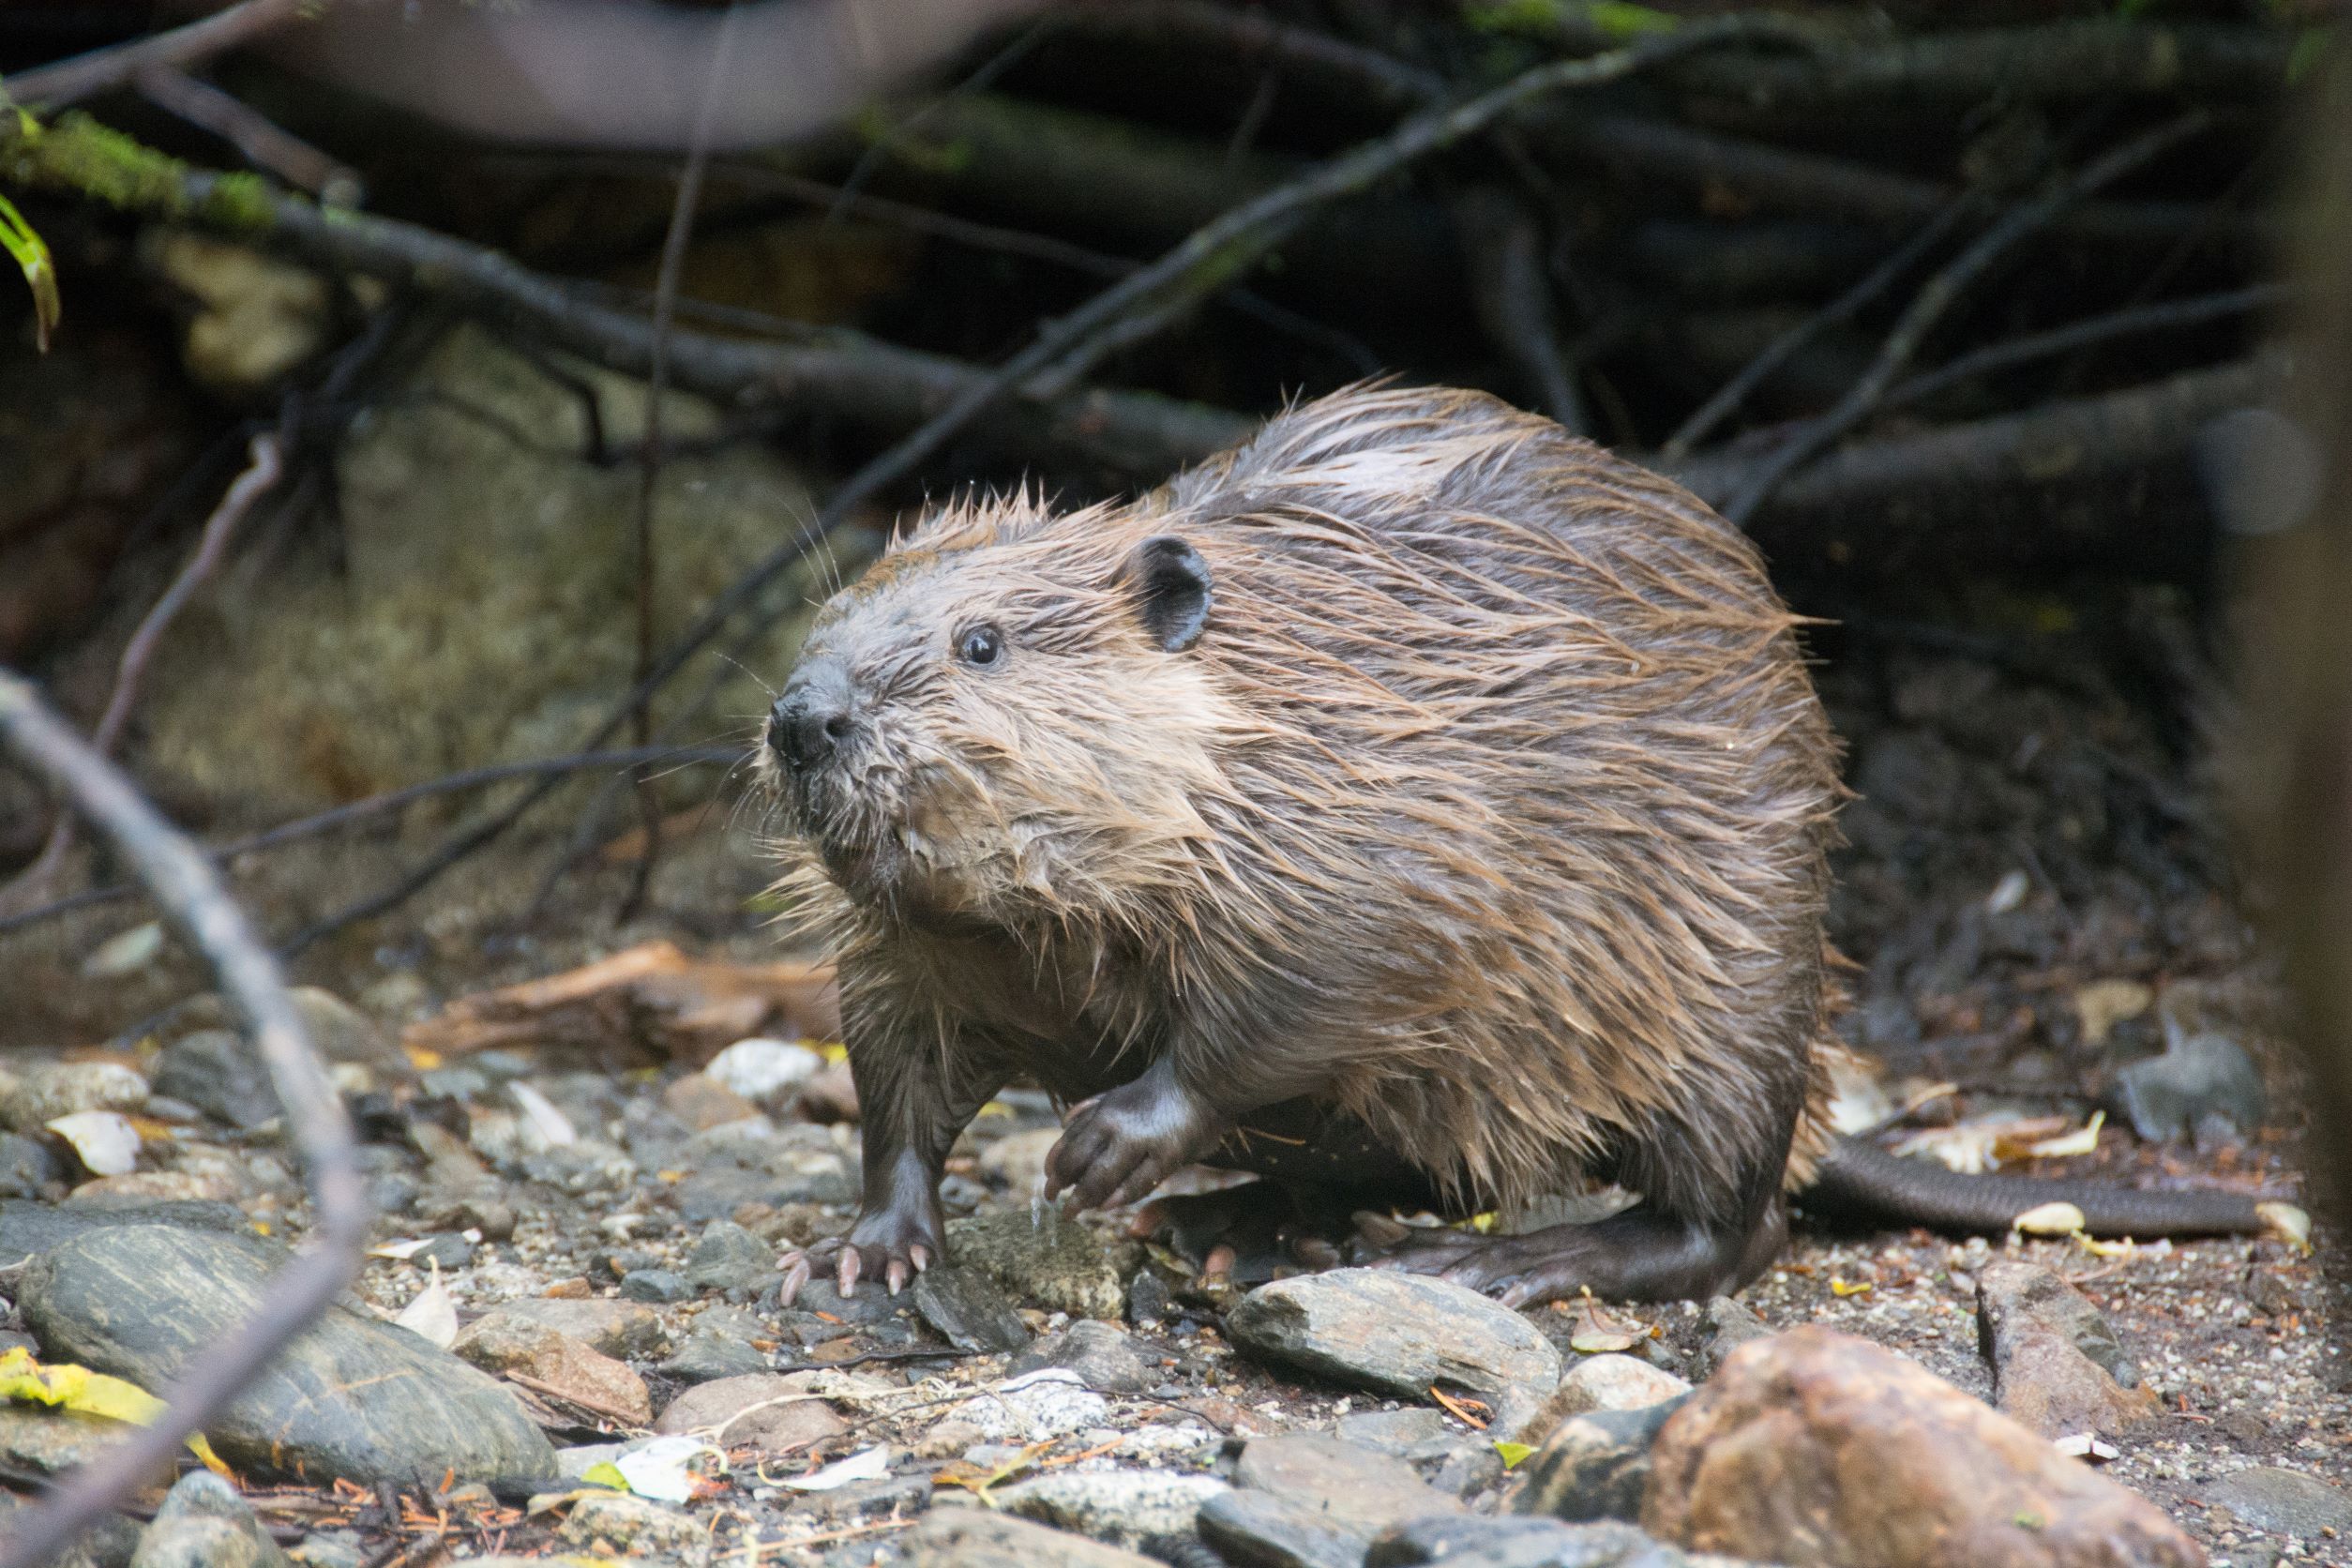 Wisconsin wildlife officials say controlling the state’s beaver population is key to healthy trout streams. But some conservation advocates are pushing back.